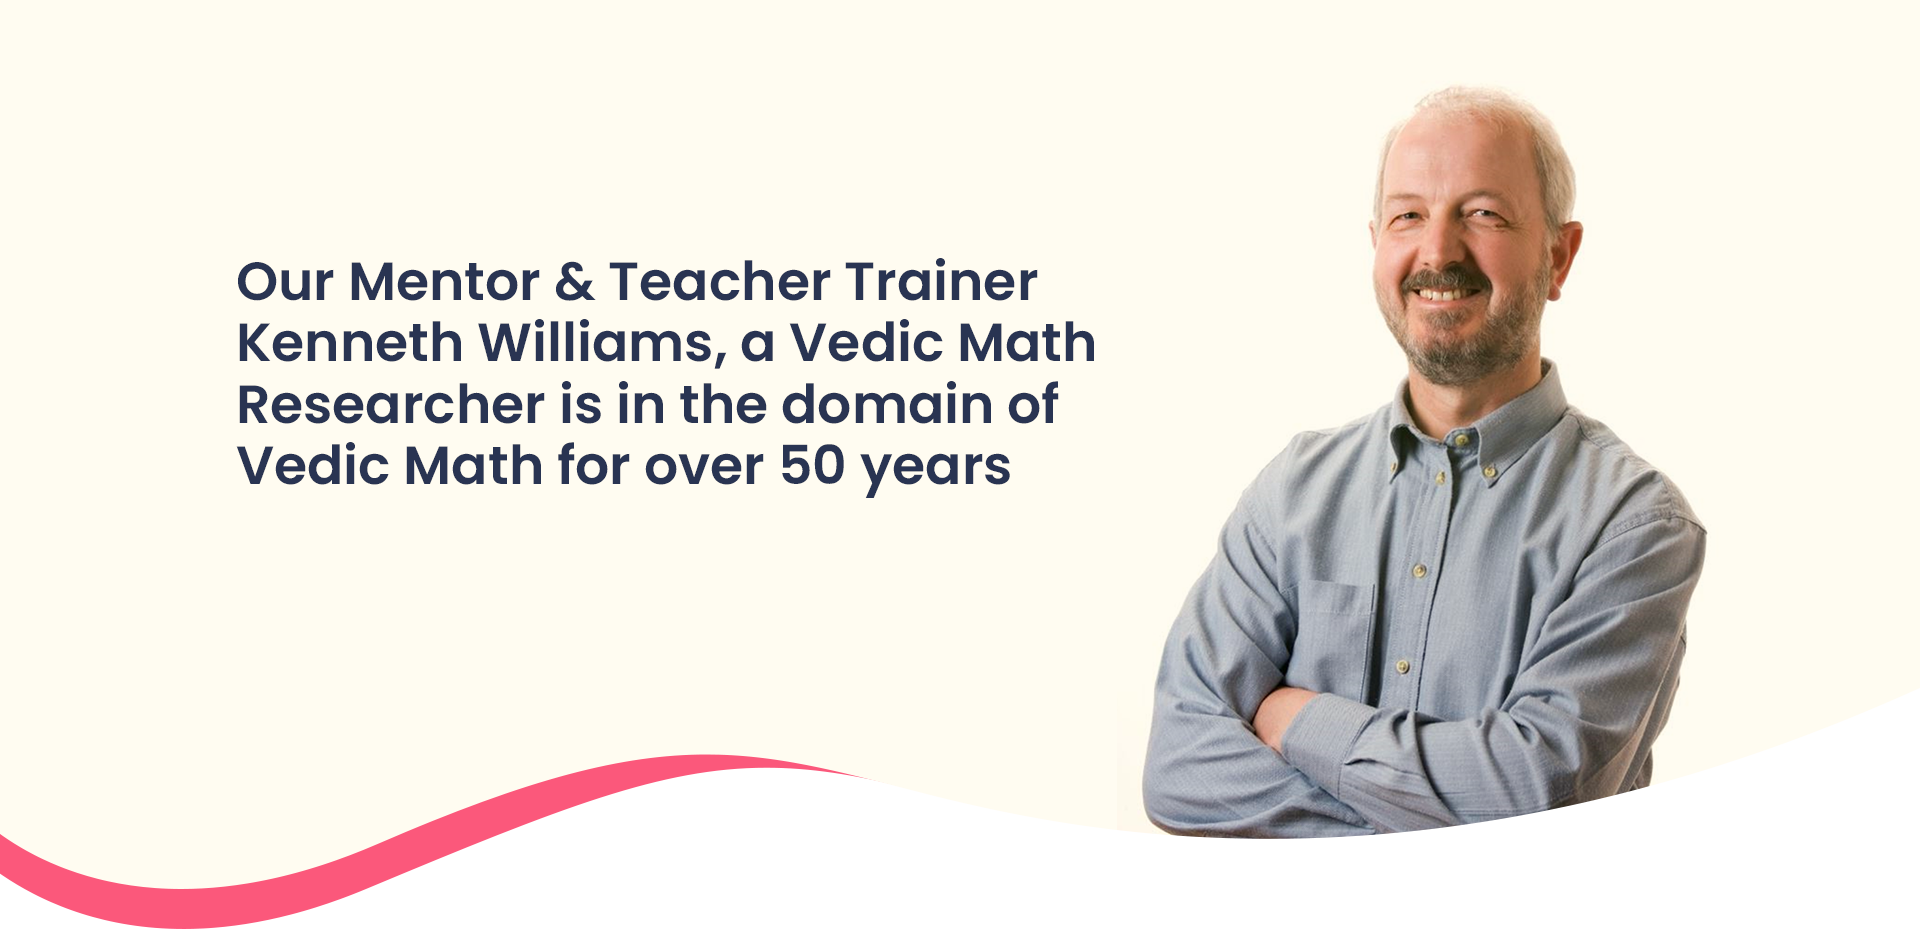 Kennth Williams- A Vedic Math researcher for over 50 years